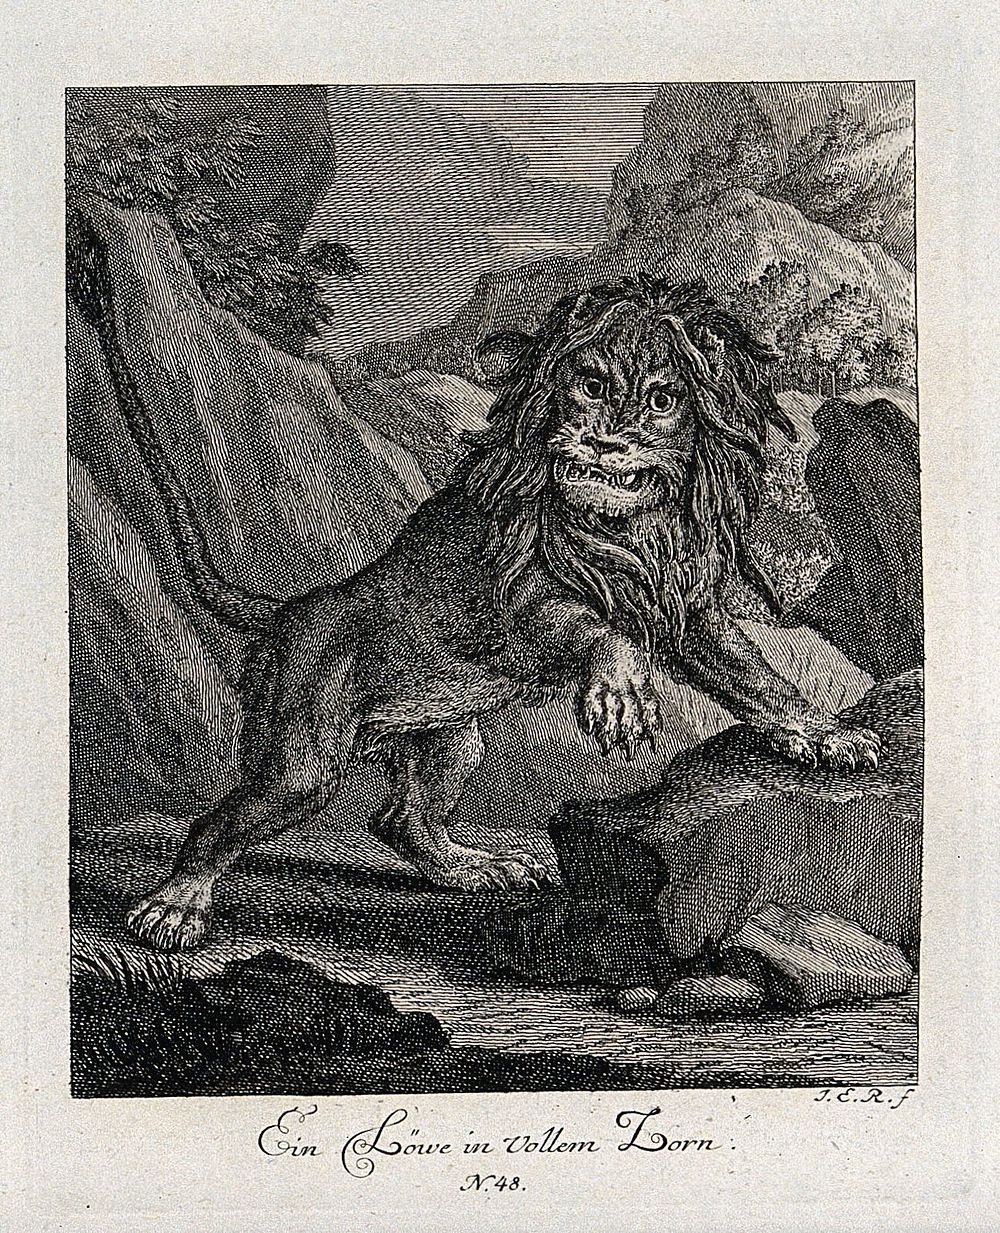 An enraged lion is roaring and leaning with its front paws on a rock. Etching by J. E. Ridinger.